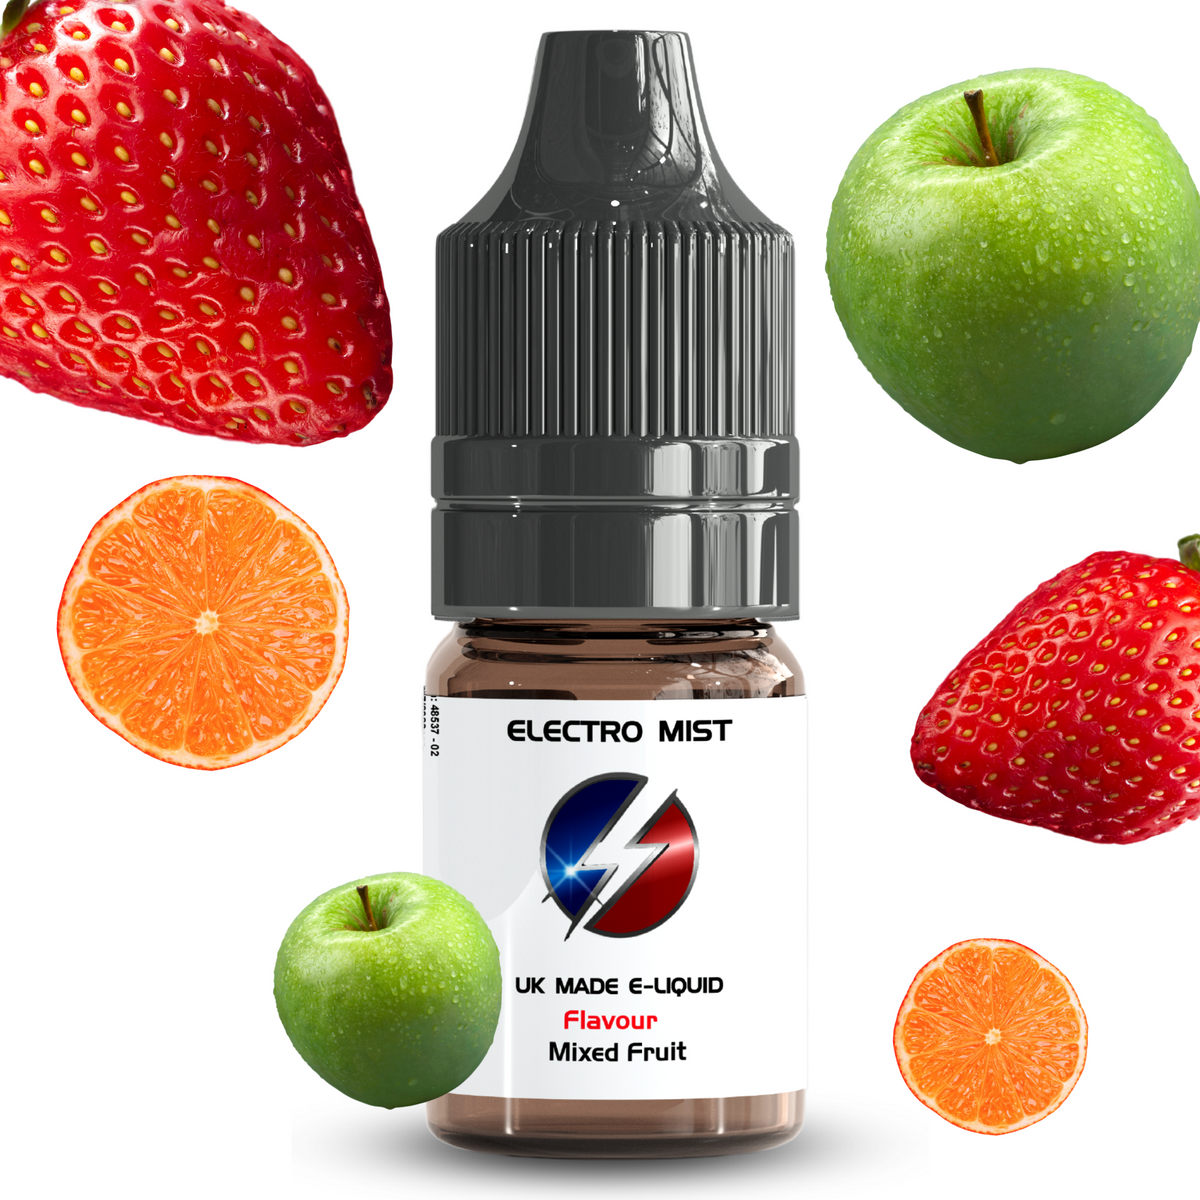 Electromist, the e-liquid brand you can trust. Get your taste buds ready for a flavour sensation, Mixed Fruit. Nicotine Content: 3mg/6mg/12mg. Products may contain nicotine. For over 18s Only ejuice, vape pen, eliquid, e cigarette, 10ml, vaping, cloud, PG, VG, 60/40, vape liquid, Flavour